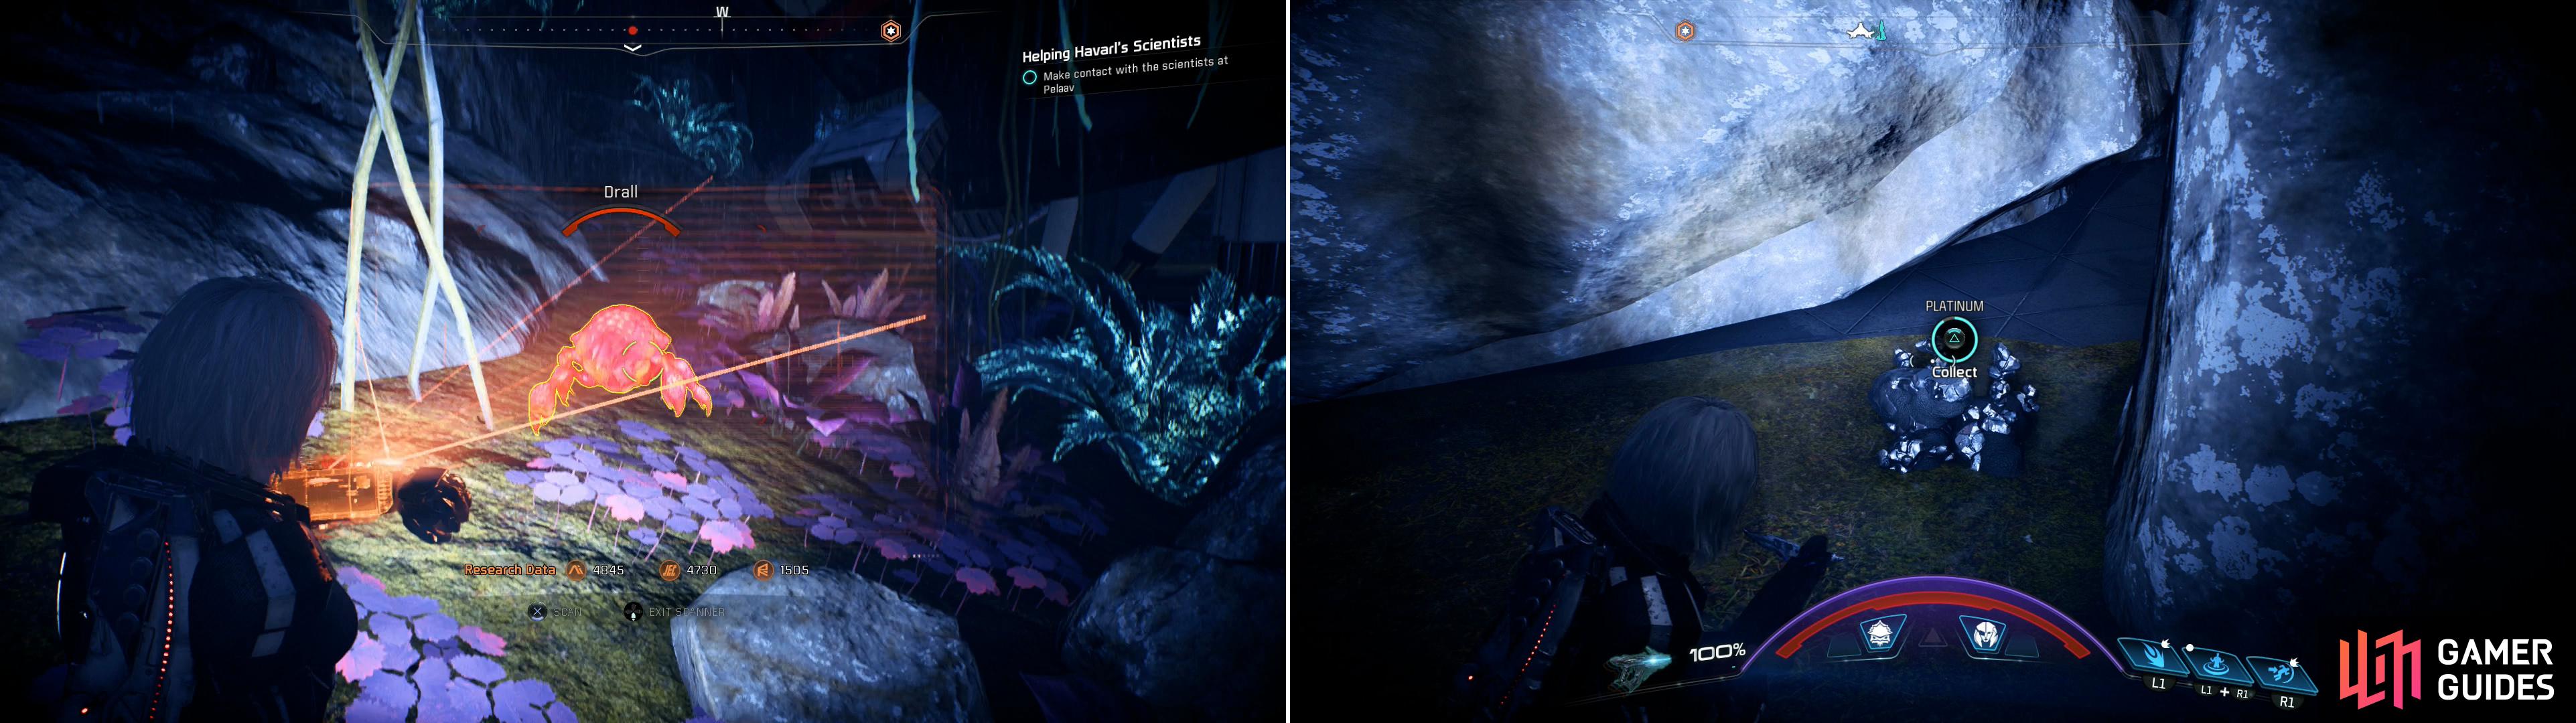 On Havarl youll find plentiful new lifeforms to scan (left) as well as abundant Platinum deposits (right).